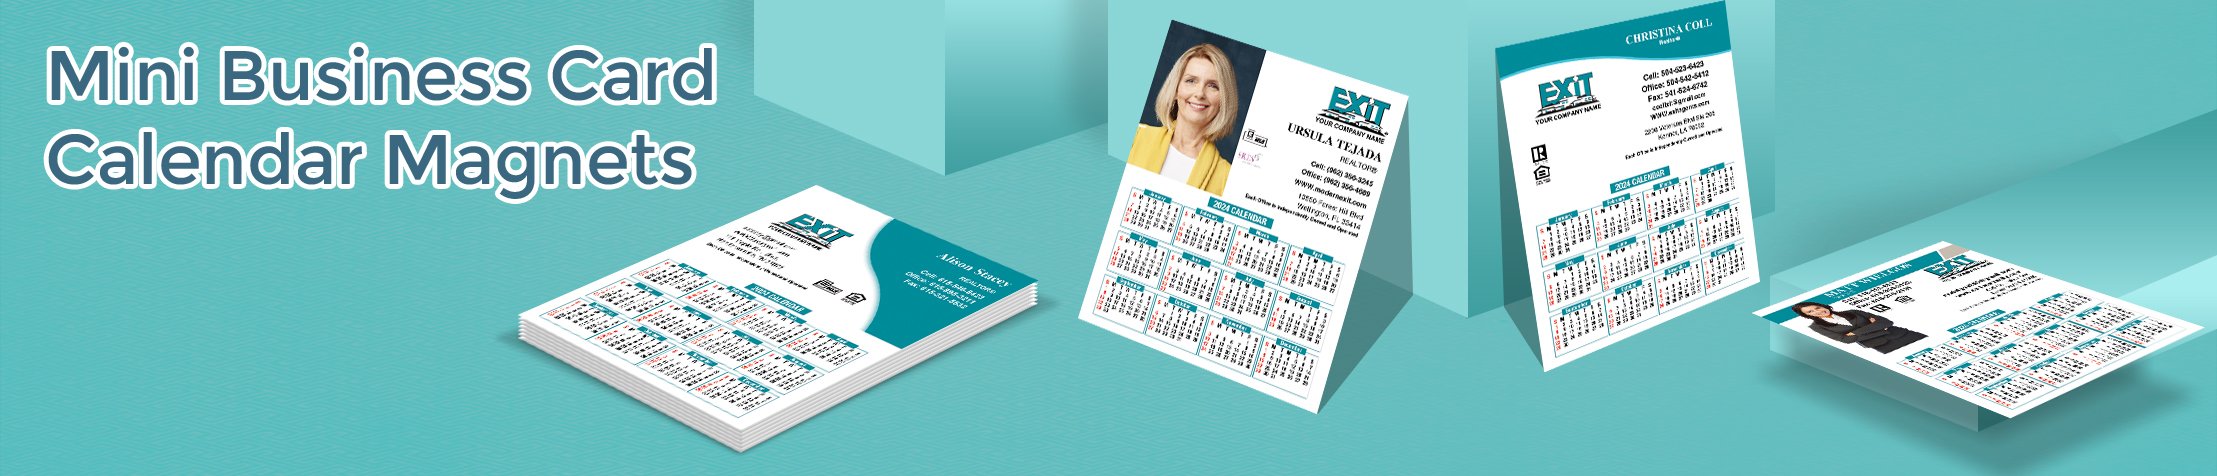 Exit Realty Mini Business Card Calendar Magnets - Exit Realty approved vendor 2019 calendars with photo and contact info, 3.5” by 4.25” | BestPrintBuy.com